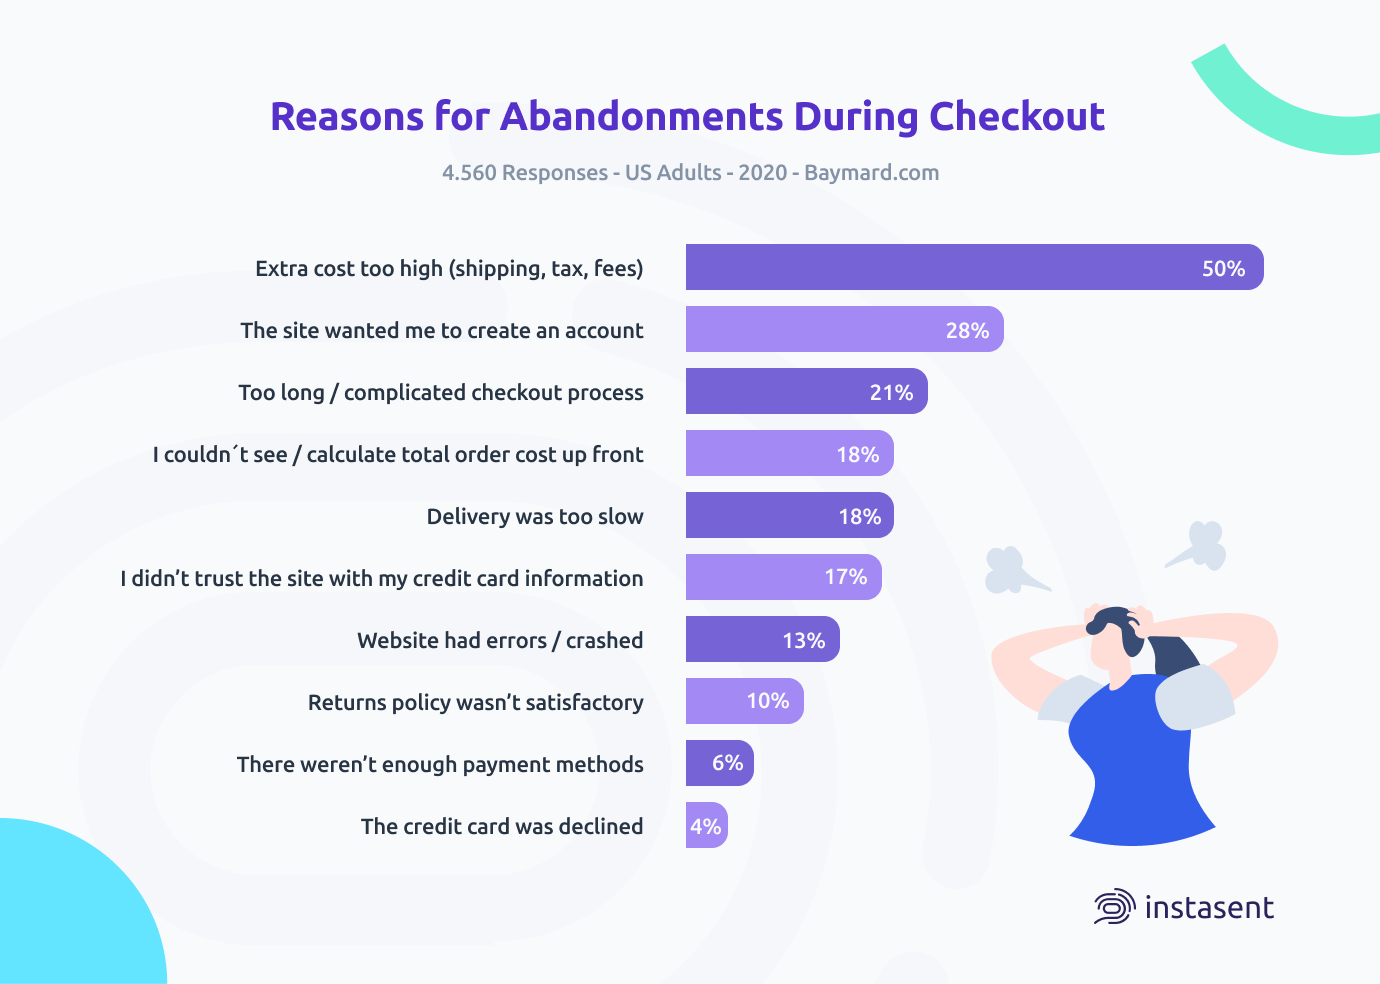 Reasons for cart abandonments during checkout